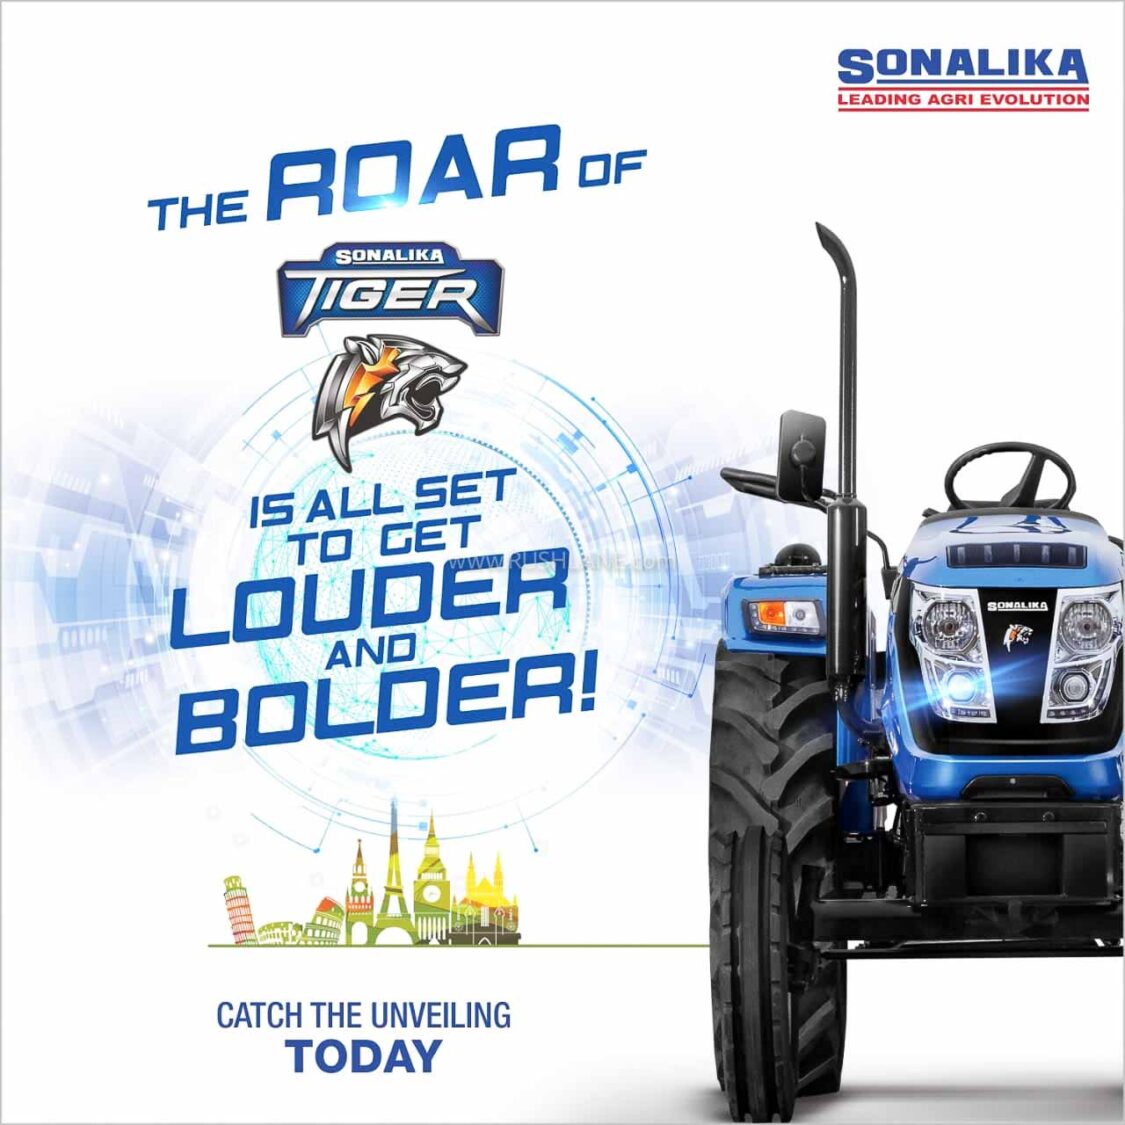 Sonalika Tractor Agriculture Projects :: Photos, videos, logos,  illustrations and branding :: Behance